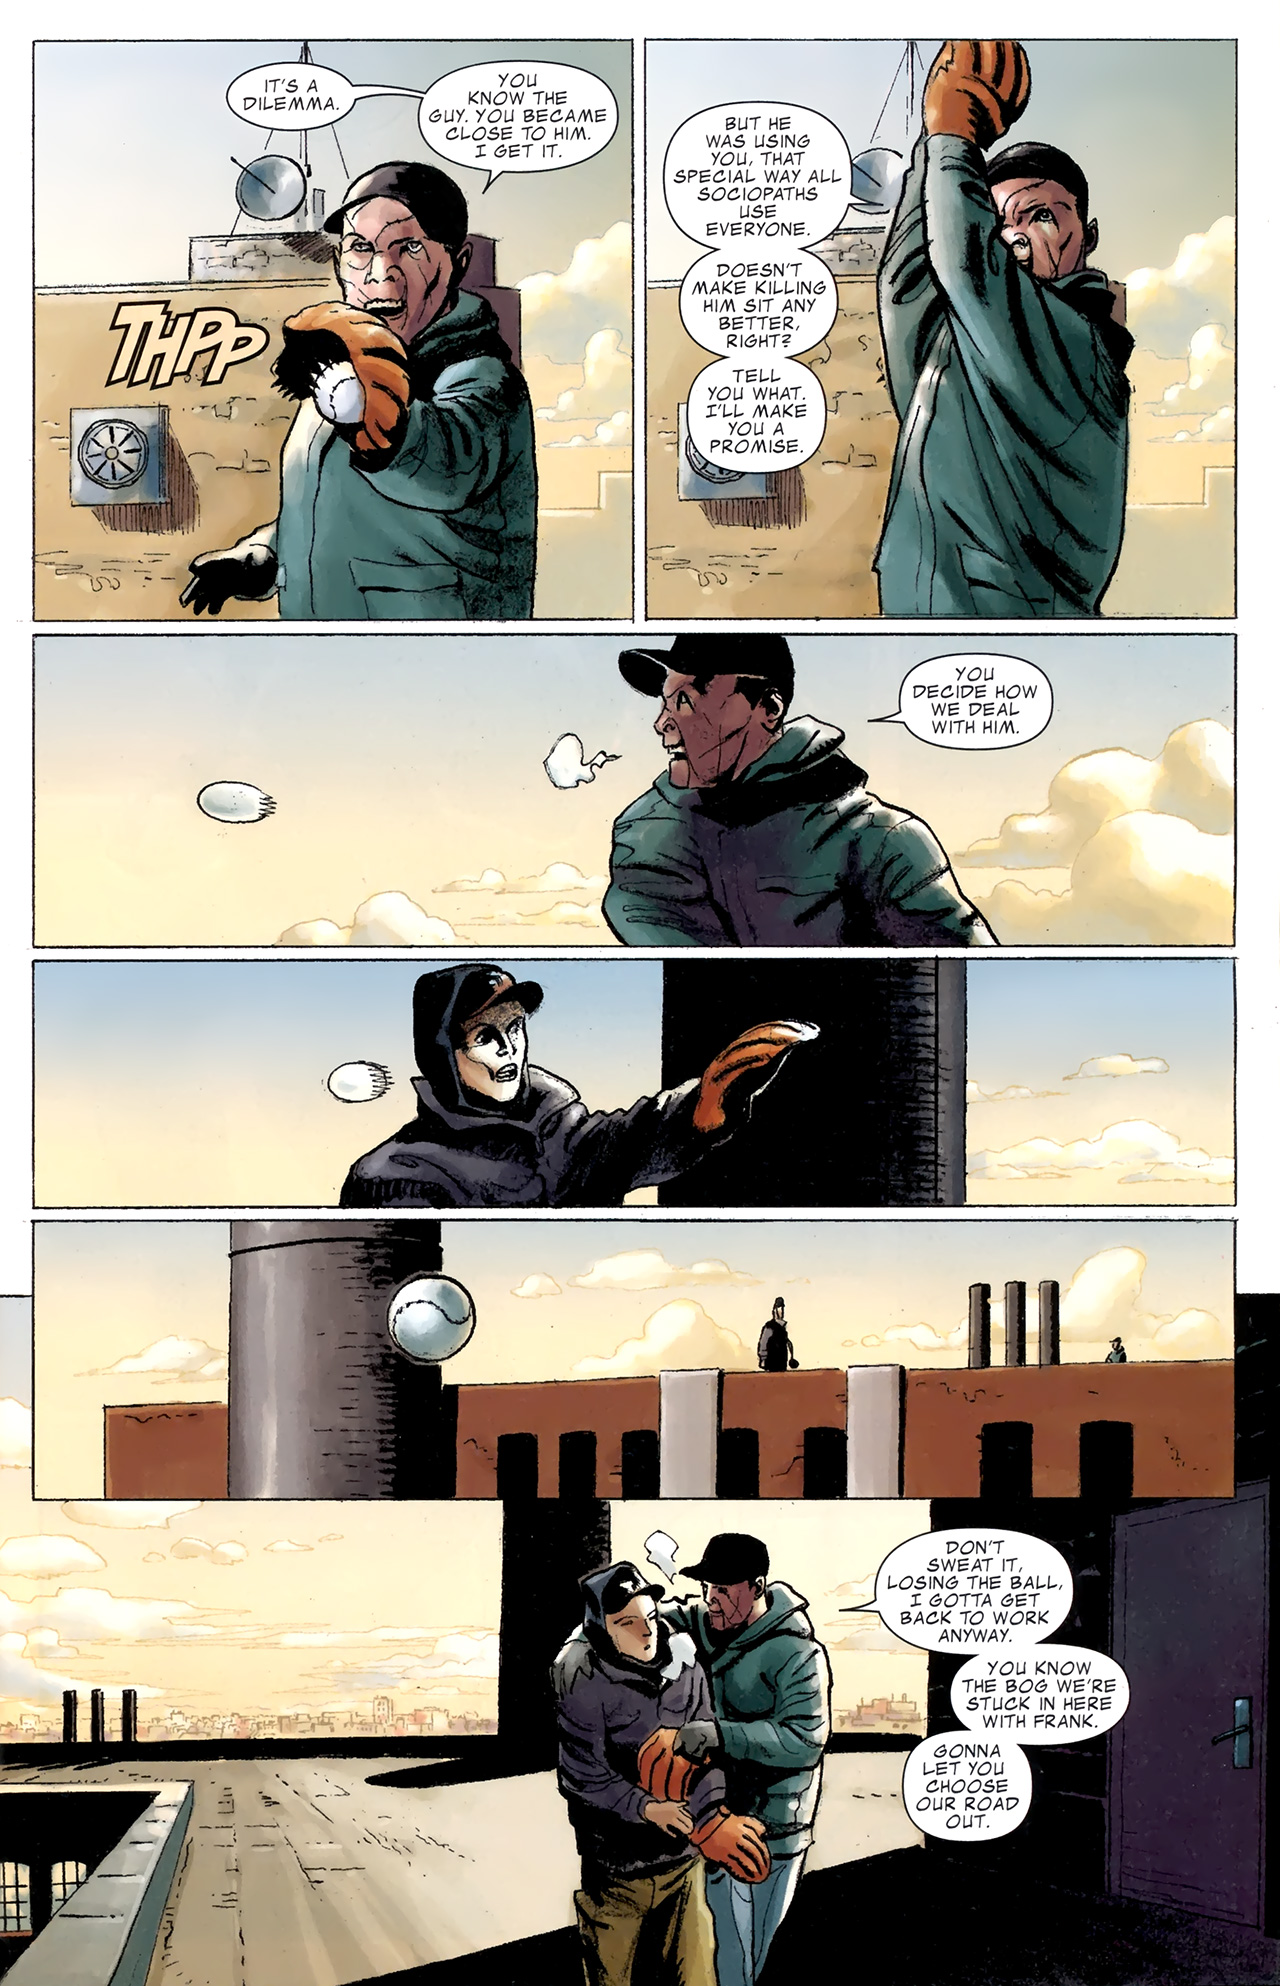 Punisher: In The Blood #4 - In The Blood, Part Four 